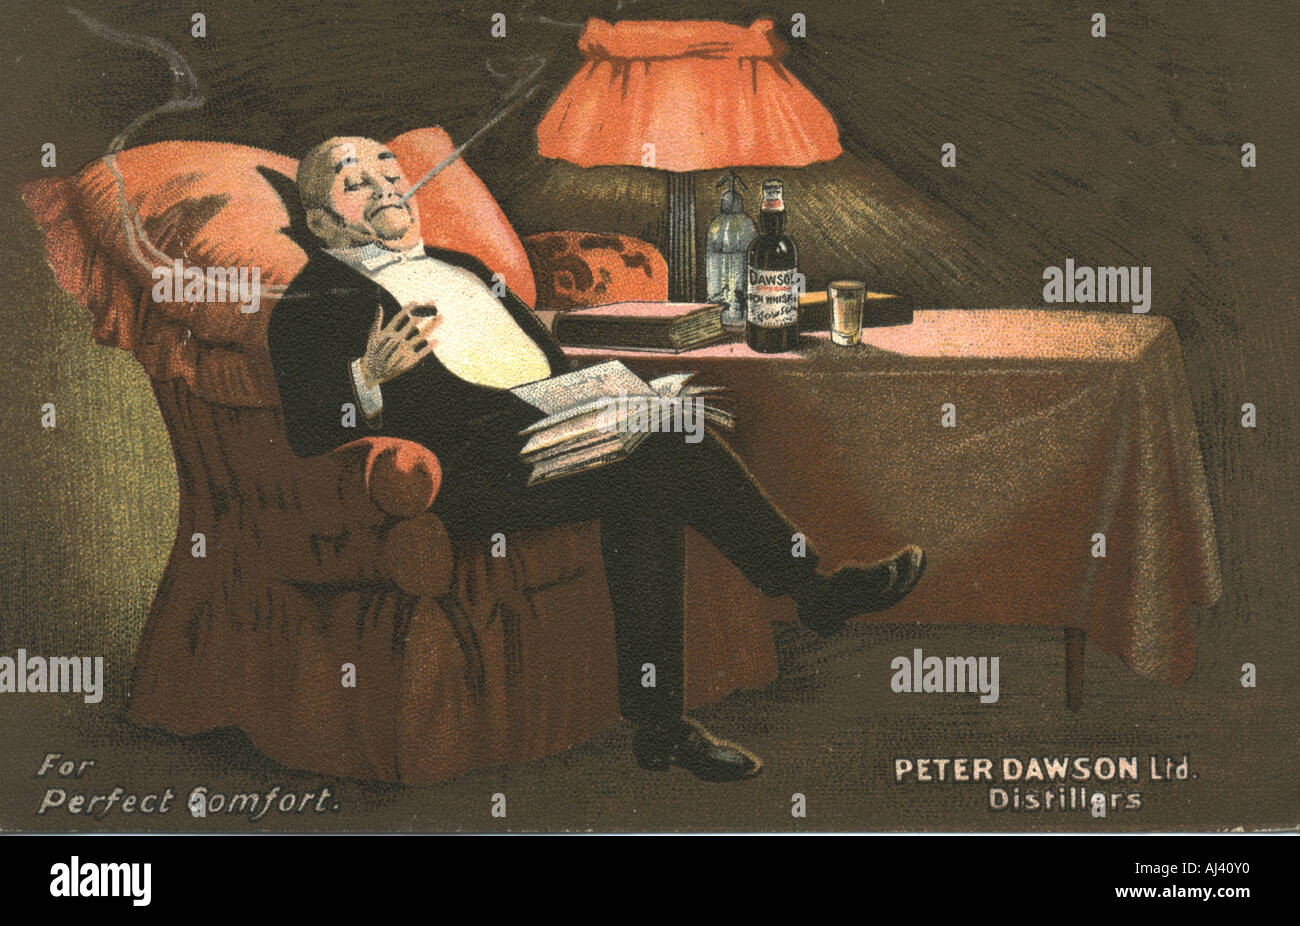 Chromolithographed advertising postcard for Peter Dawson Ltd., Distillers titled For Perfect Comfort  circa 1905 Stock Photo